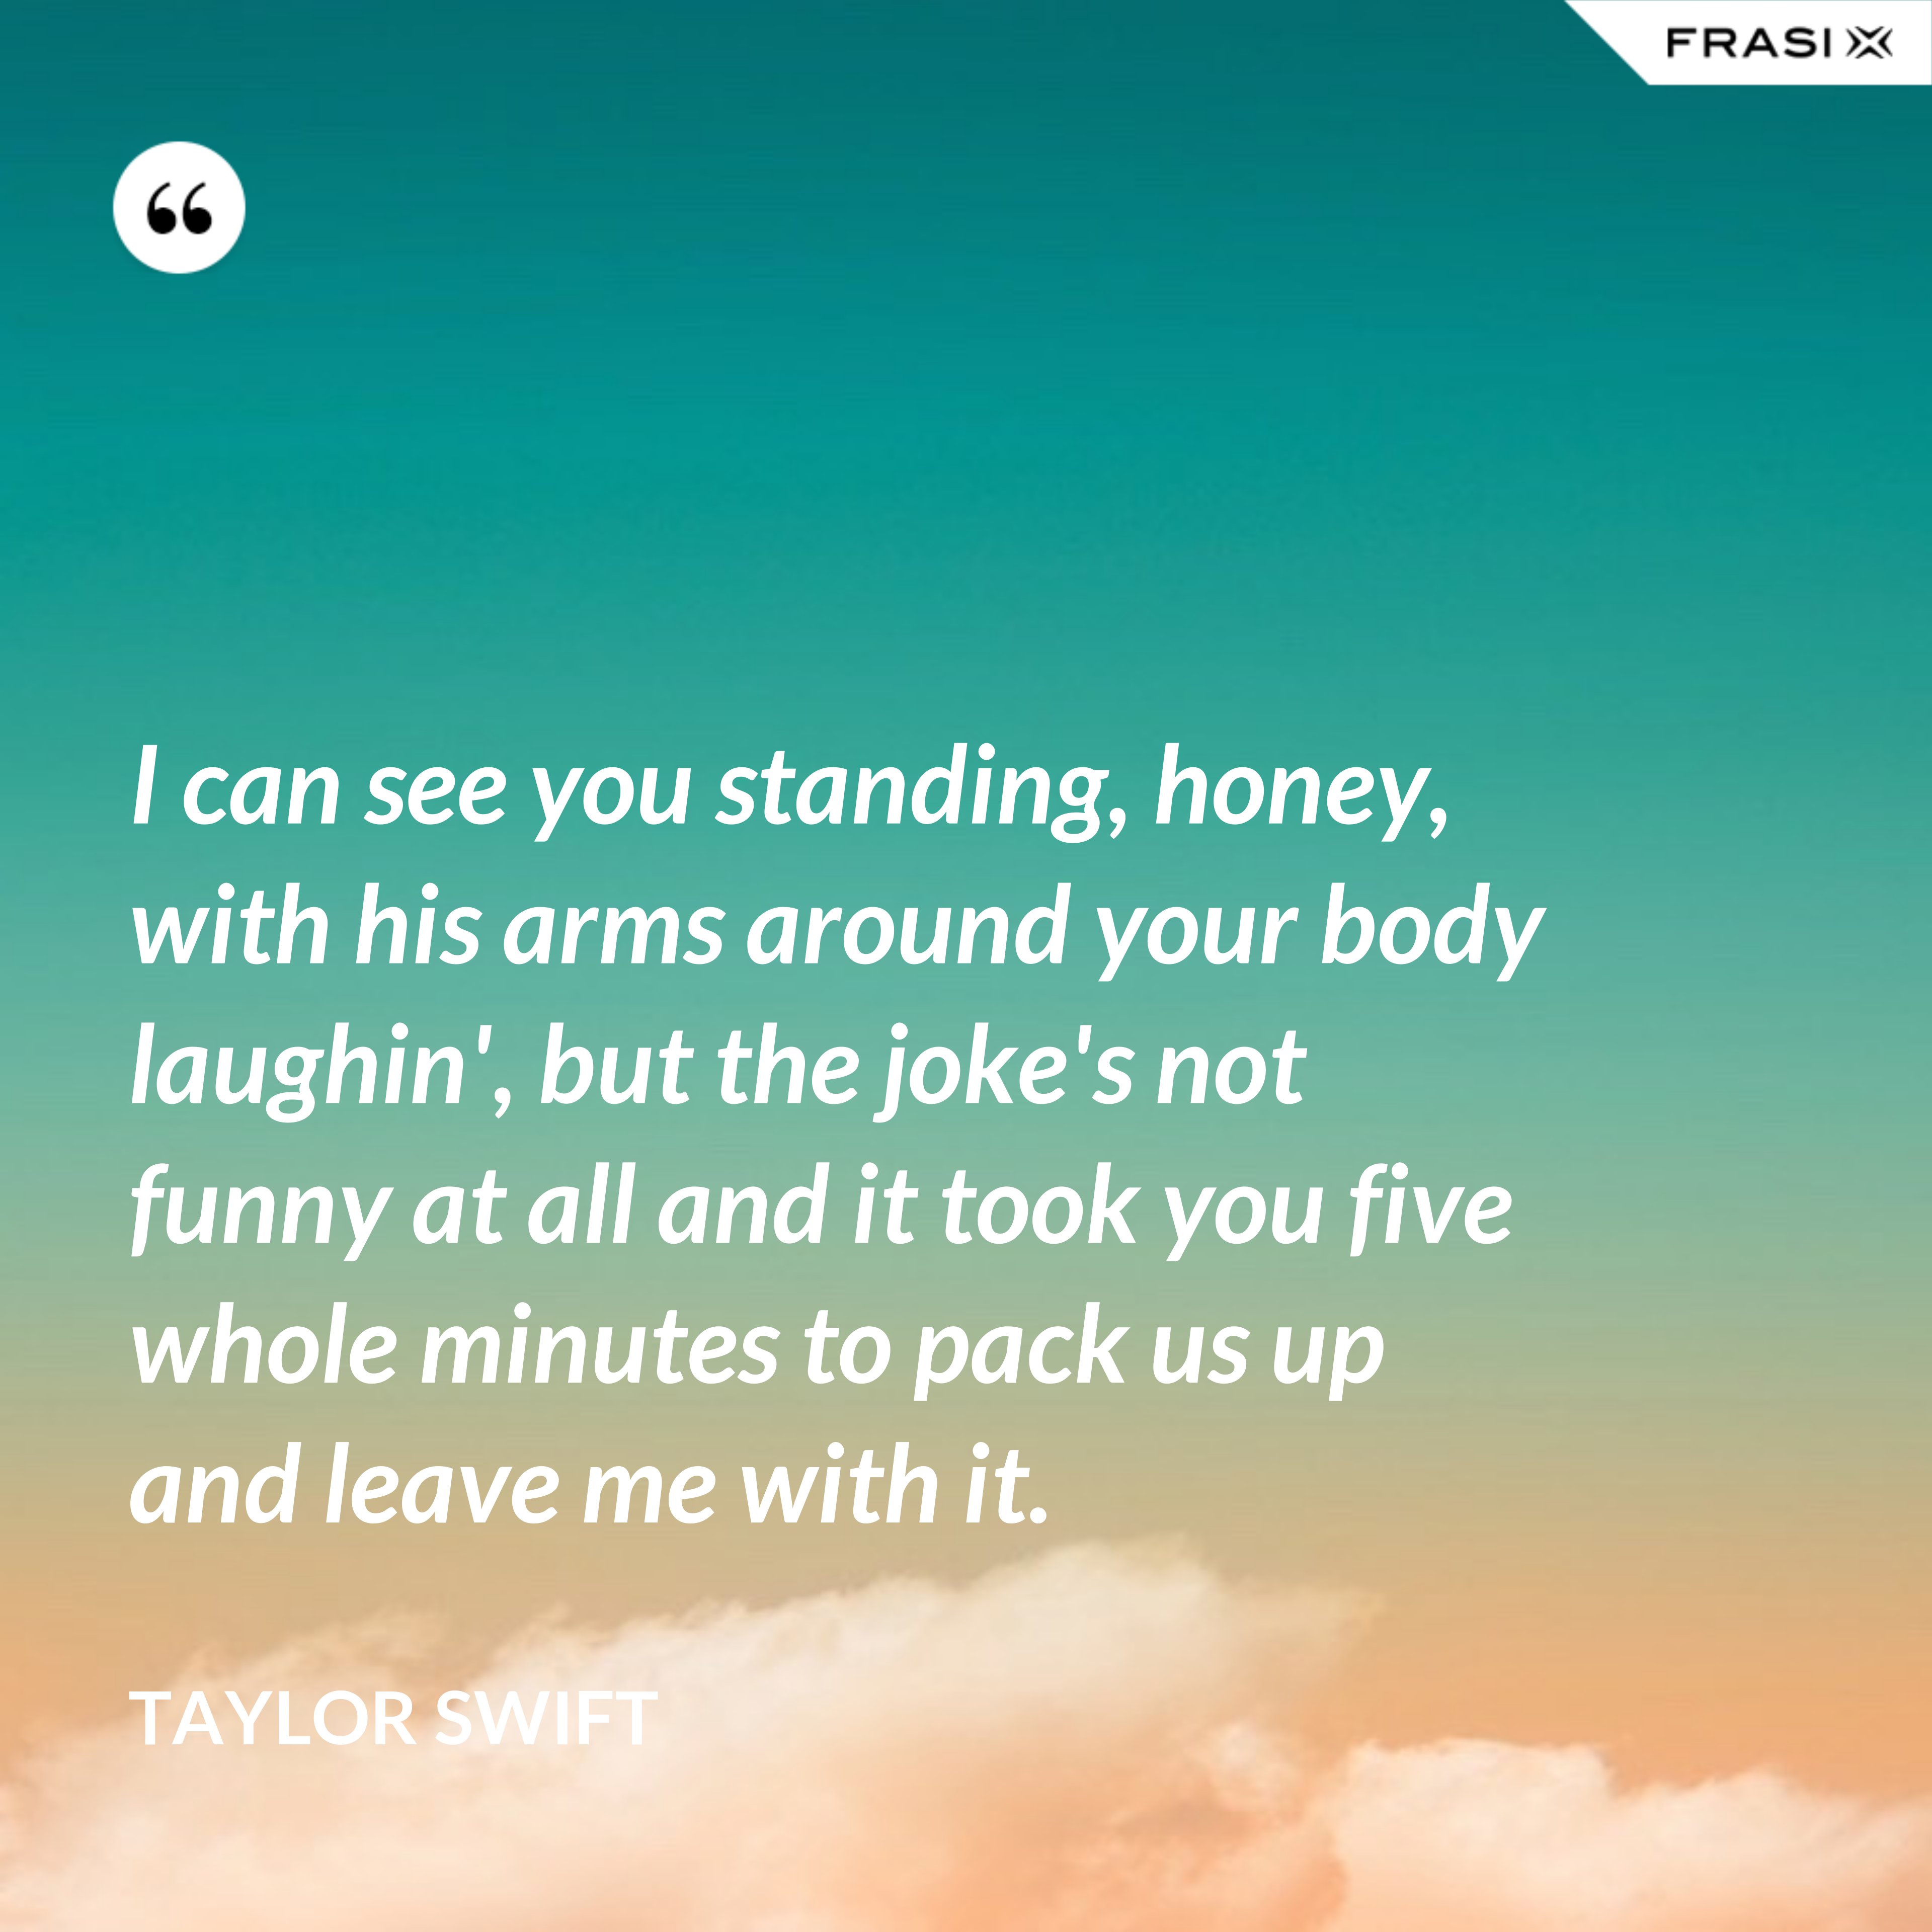 I can see you standing, honey, with his arms around your body laughin', but the joke's not funny at all and it took you five whole minutes to pack us up and leave me with it. - Taylor Swift